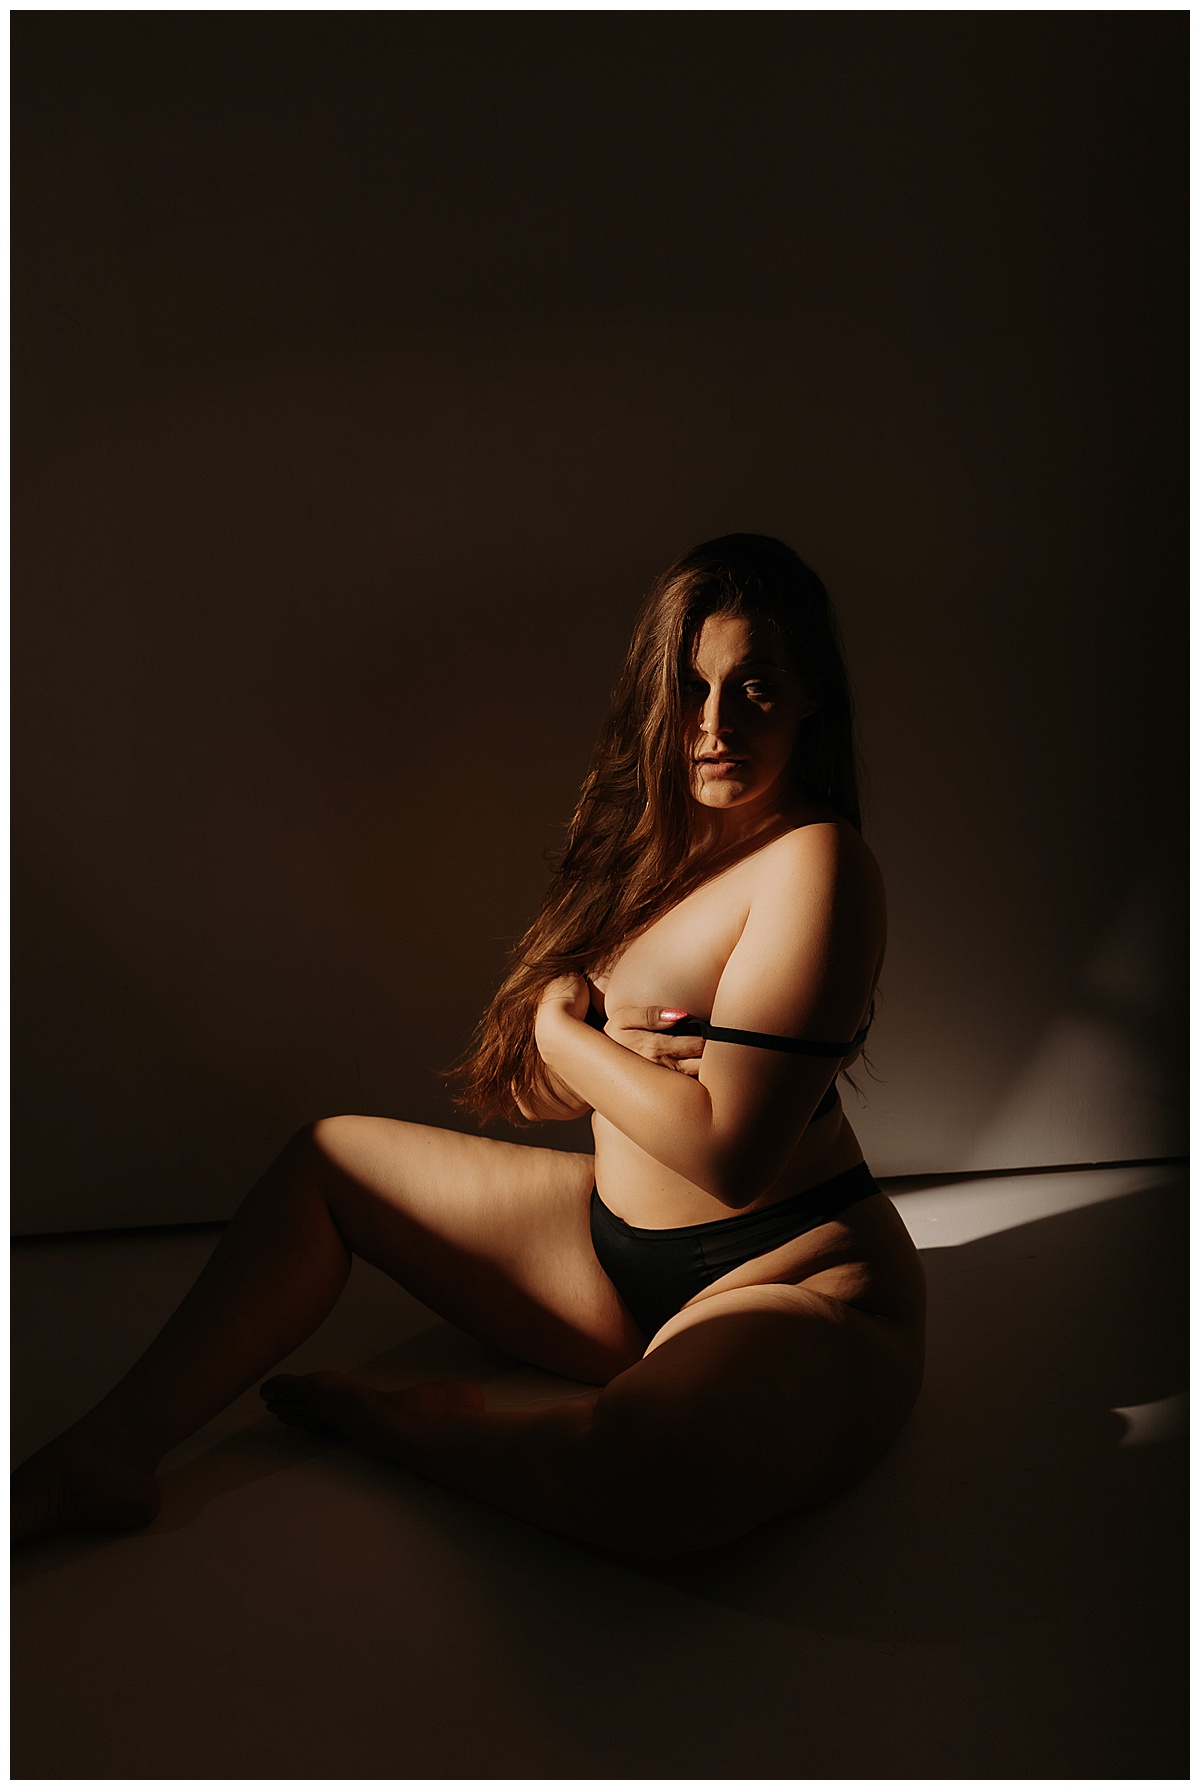 Female covers body using artificial light during boudoir session